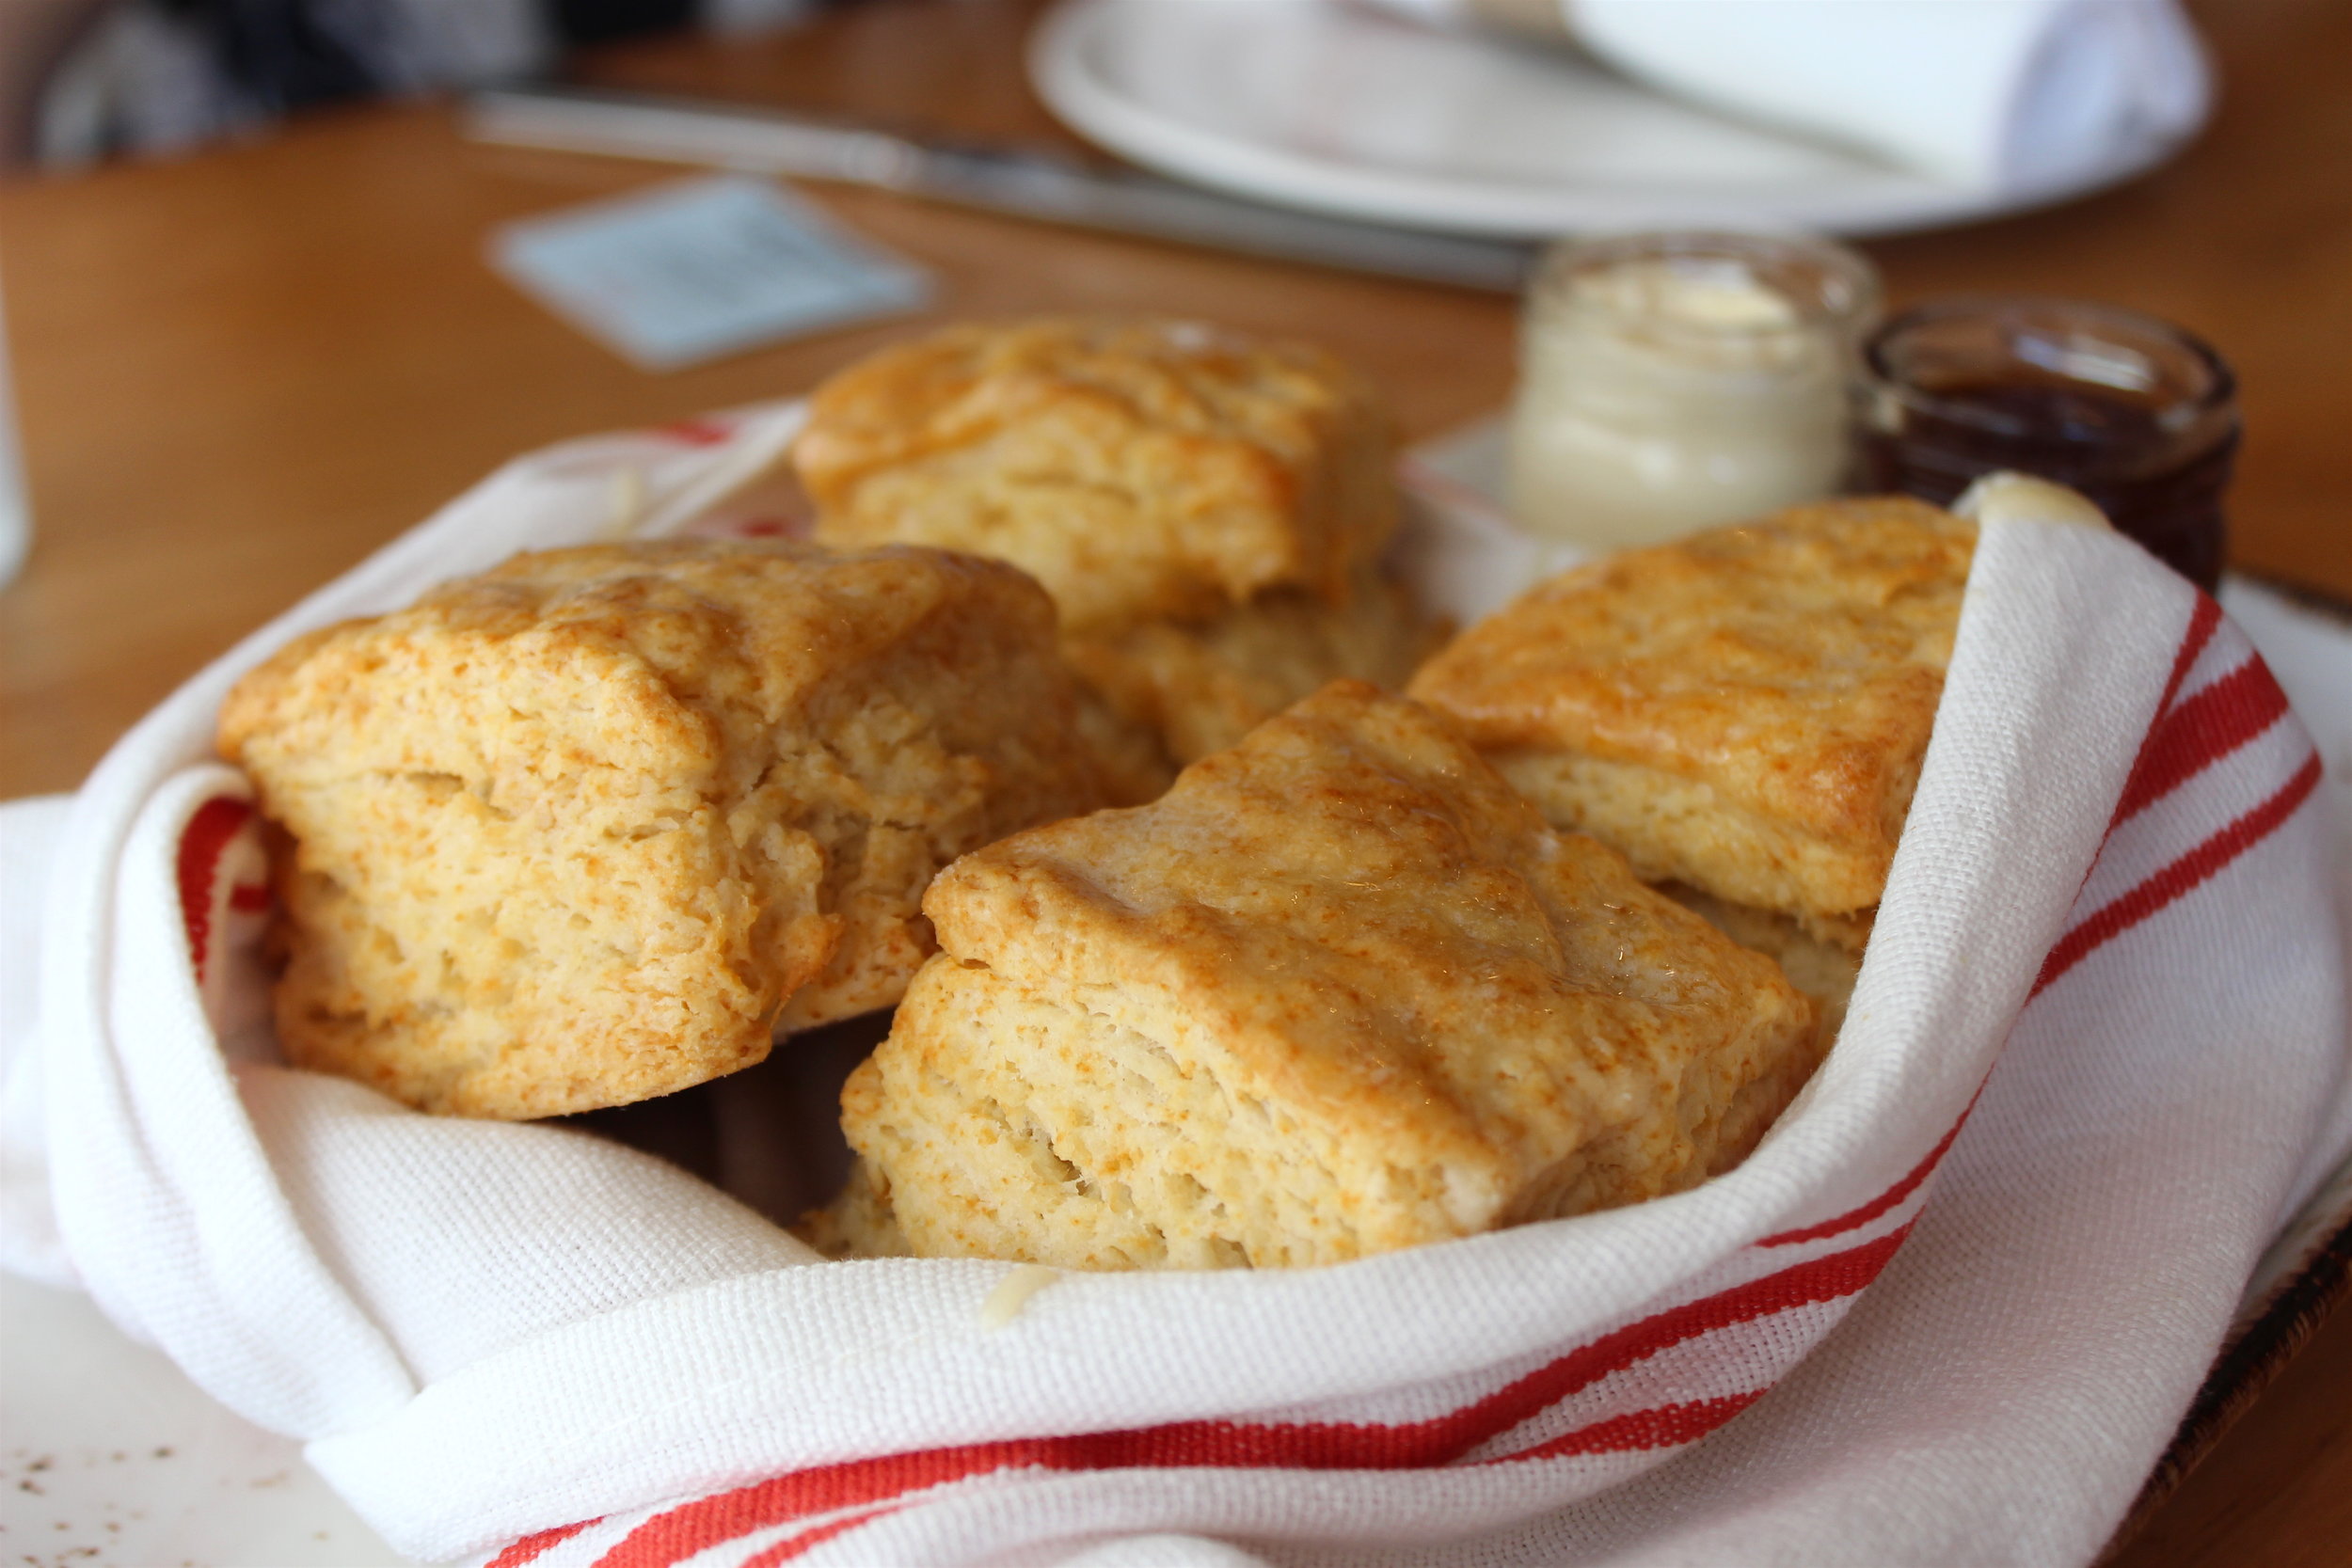 Classic Buttermilk Biscuits with Honey Butter, House-made Jam